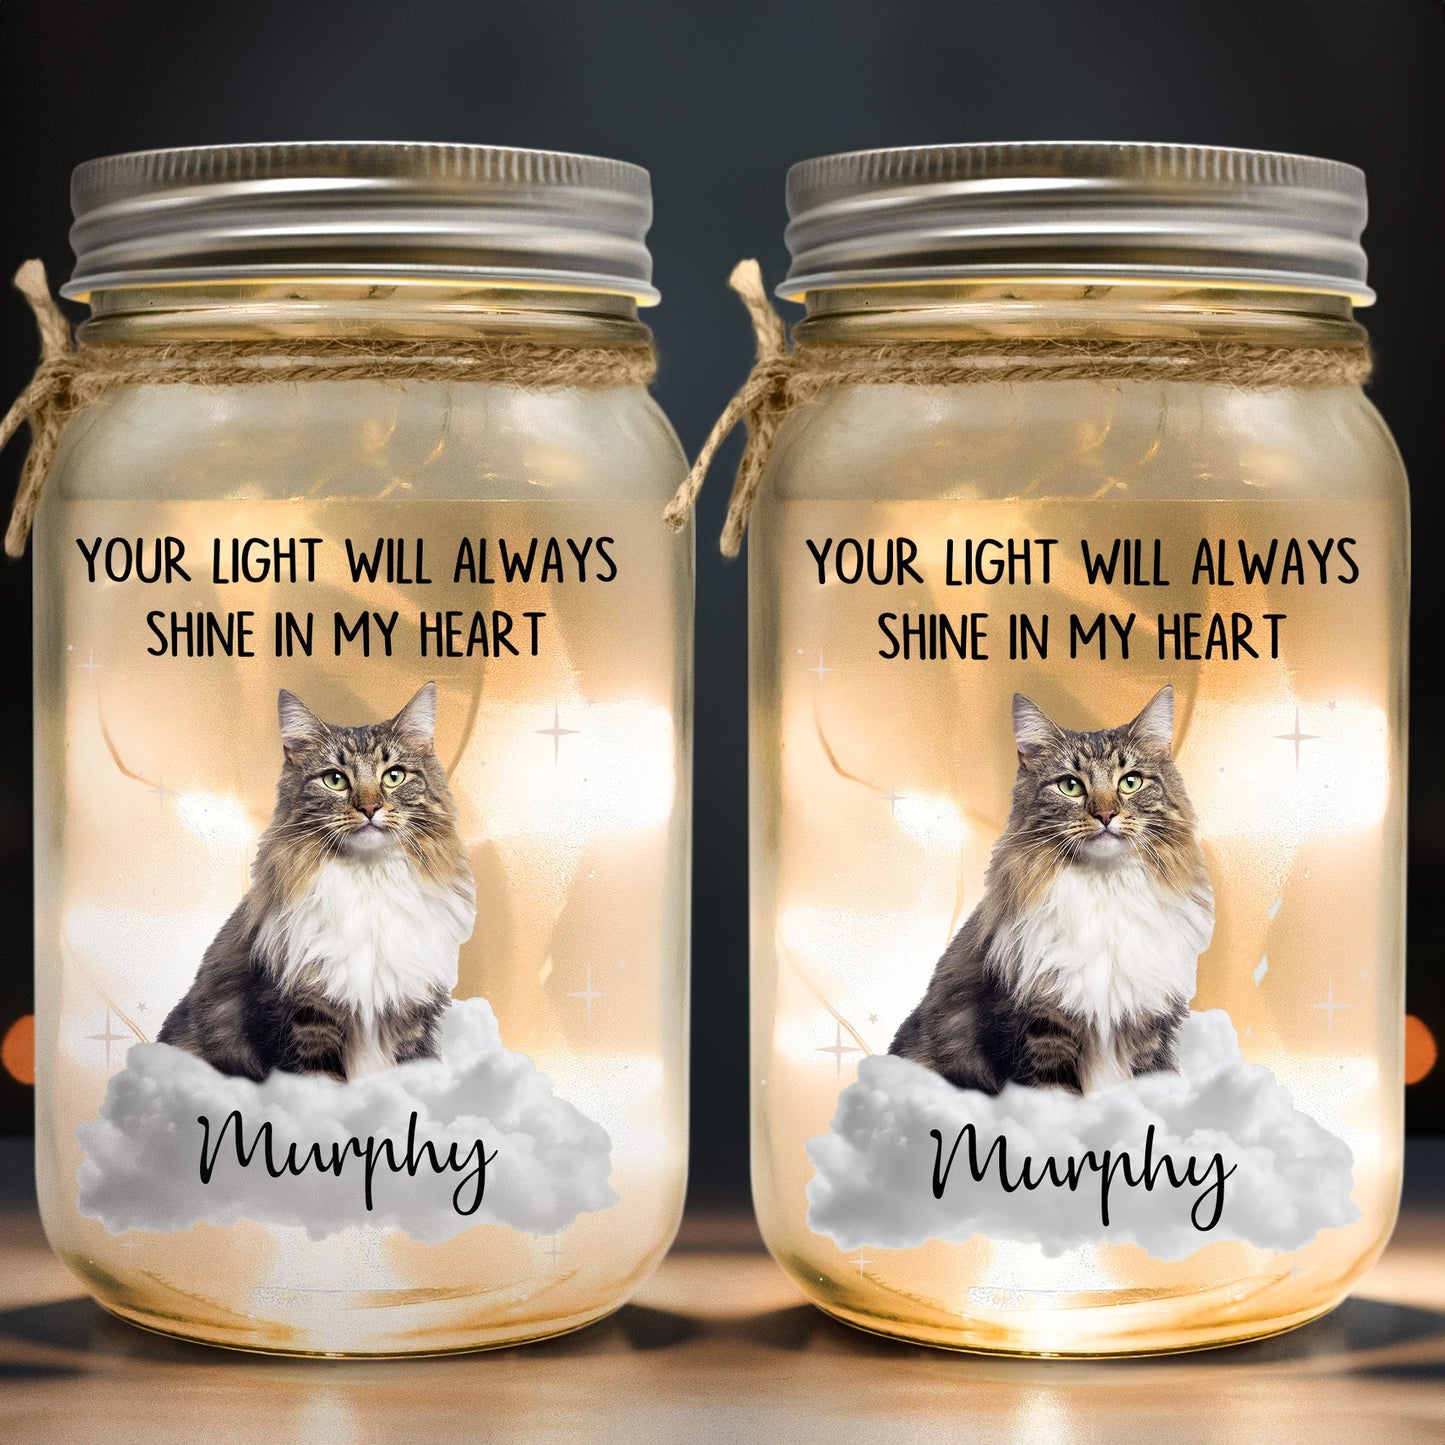 Your Light Will Always Shine In My Heart - Personalized Photo Mason Jar Light